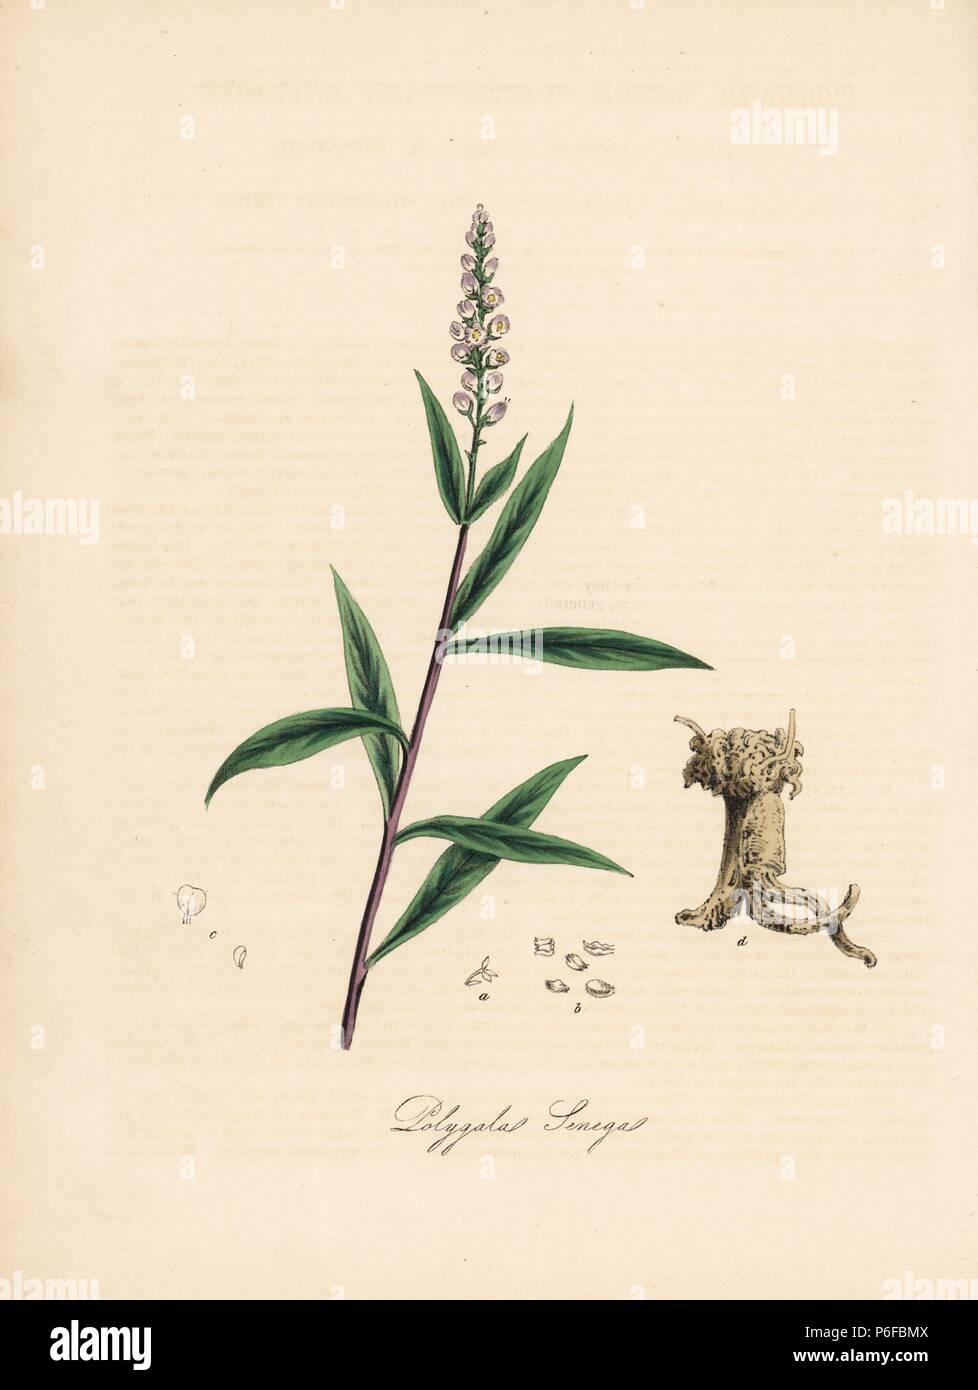 Seneca snakeroot, Polygala senega. Handcoloured zincograph by C. Chabot drawn by Miss M. A. Burnett from her 'Plantae Utiliores: or Illustrations of Useful Plants,' Whittaker, London, 1842. Miss Burnett drew the botanical illustrations, but the text was chiefly by her late brother, British botanist Gilbert Thomas Burnett (1800-1835). Stock Photo